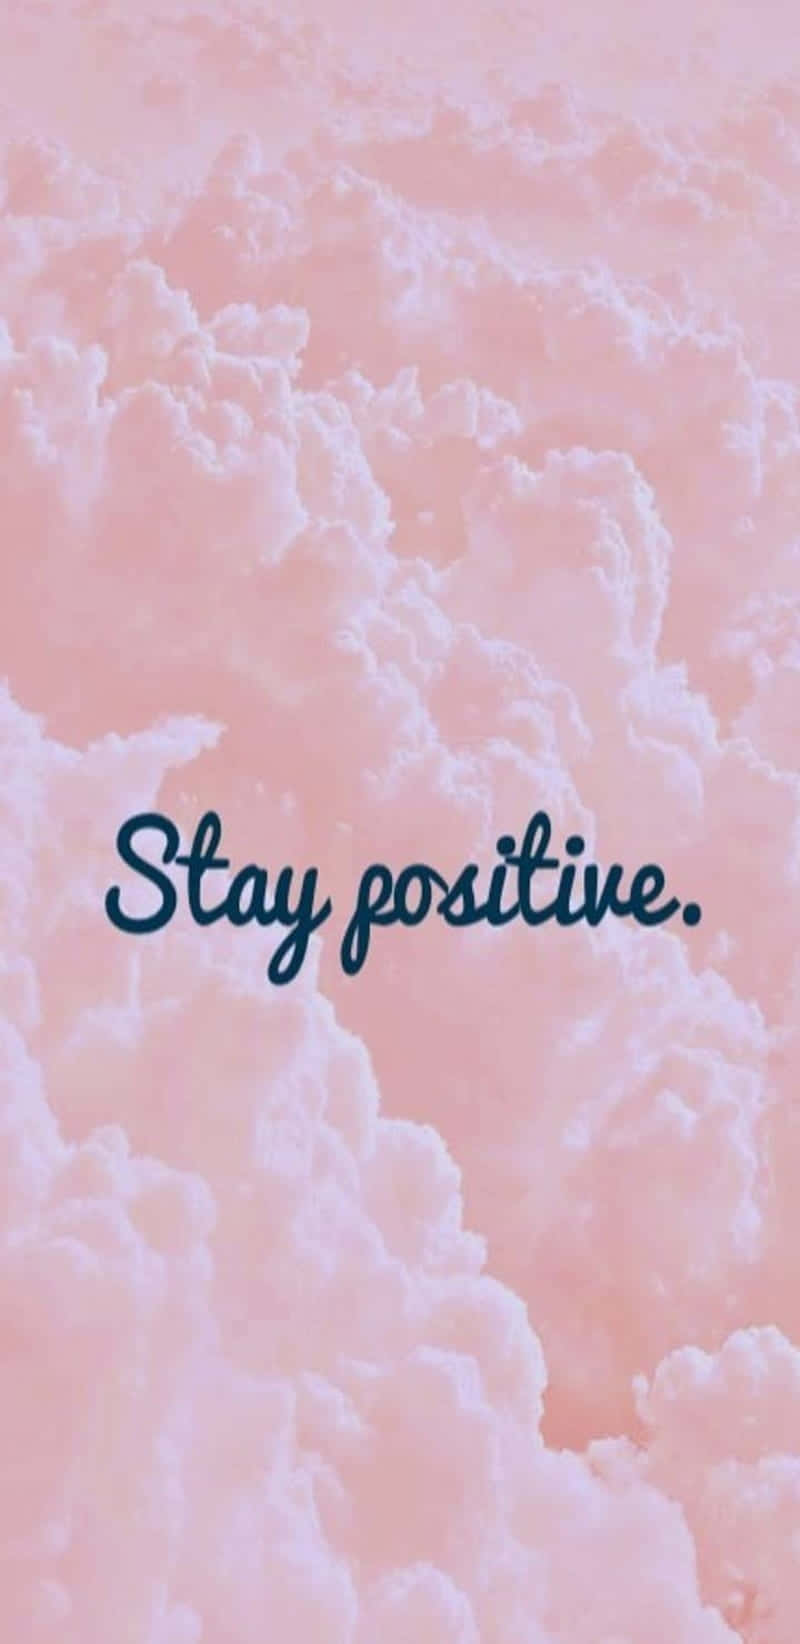 Stay Positive_ Pink Clouds Inspirational Quote.jpg Wallpaper